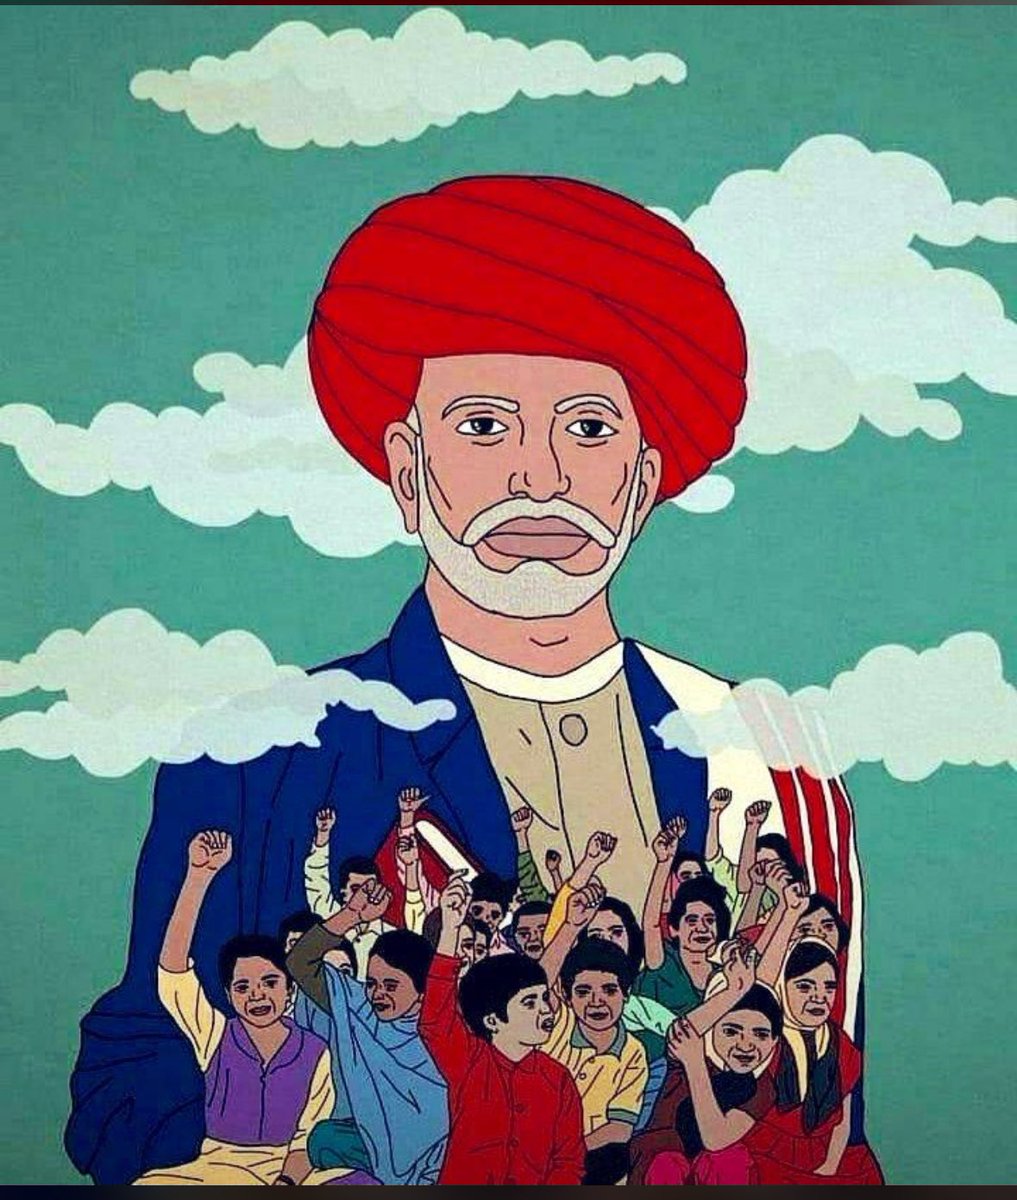 Remembering the great social reformer and pioneer of women's education, Mahatma Jyotiba Phule, on his birth anniversary. His teachings on equality, social justice, and education continue to inspire us today. 
#JyotibaPhuleJayanti #SocialReformer #EducationForAll